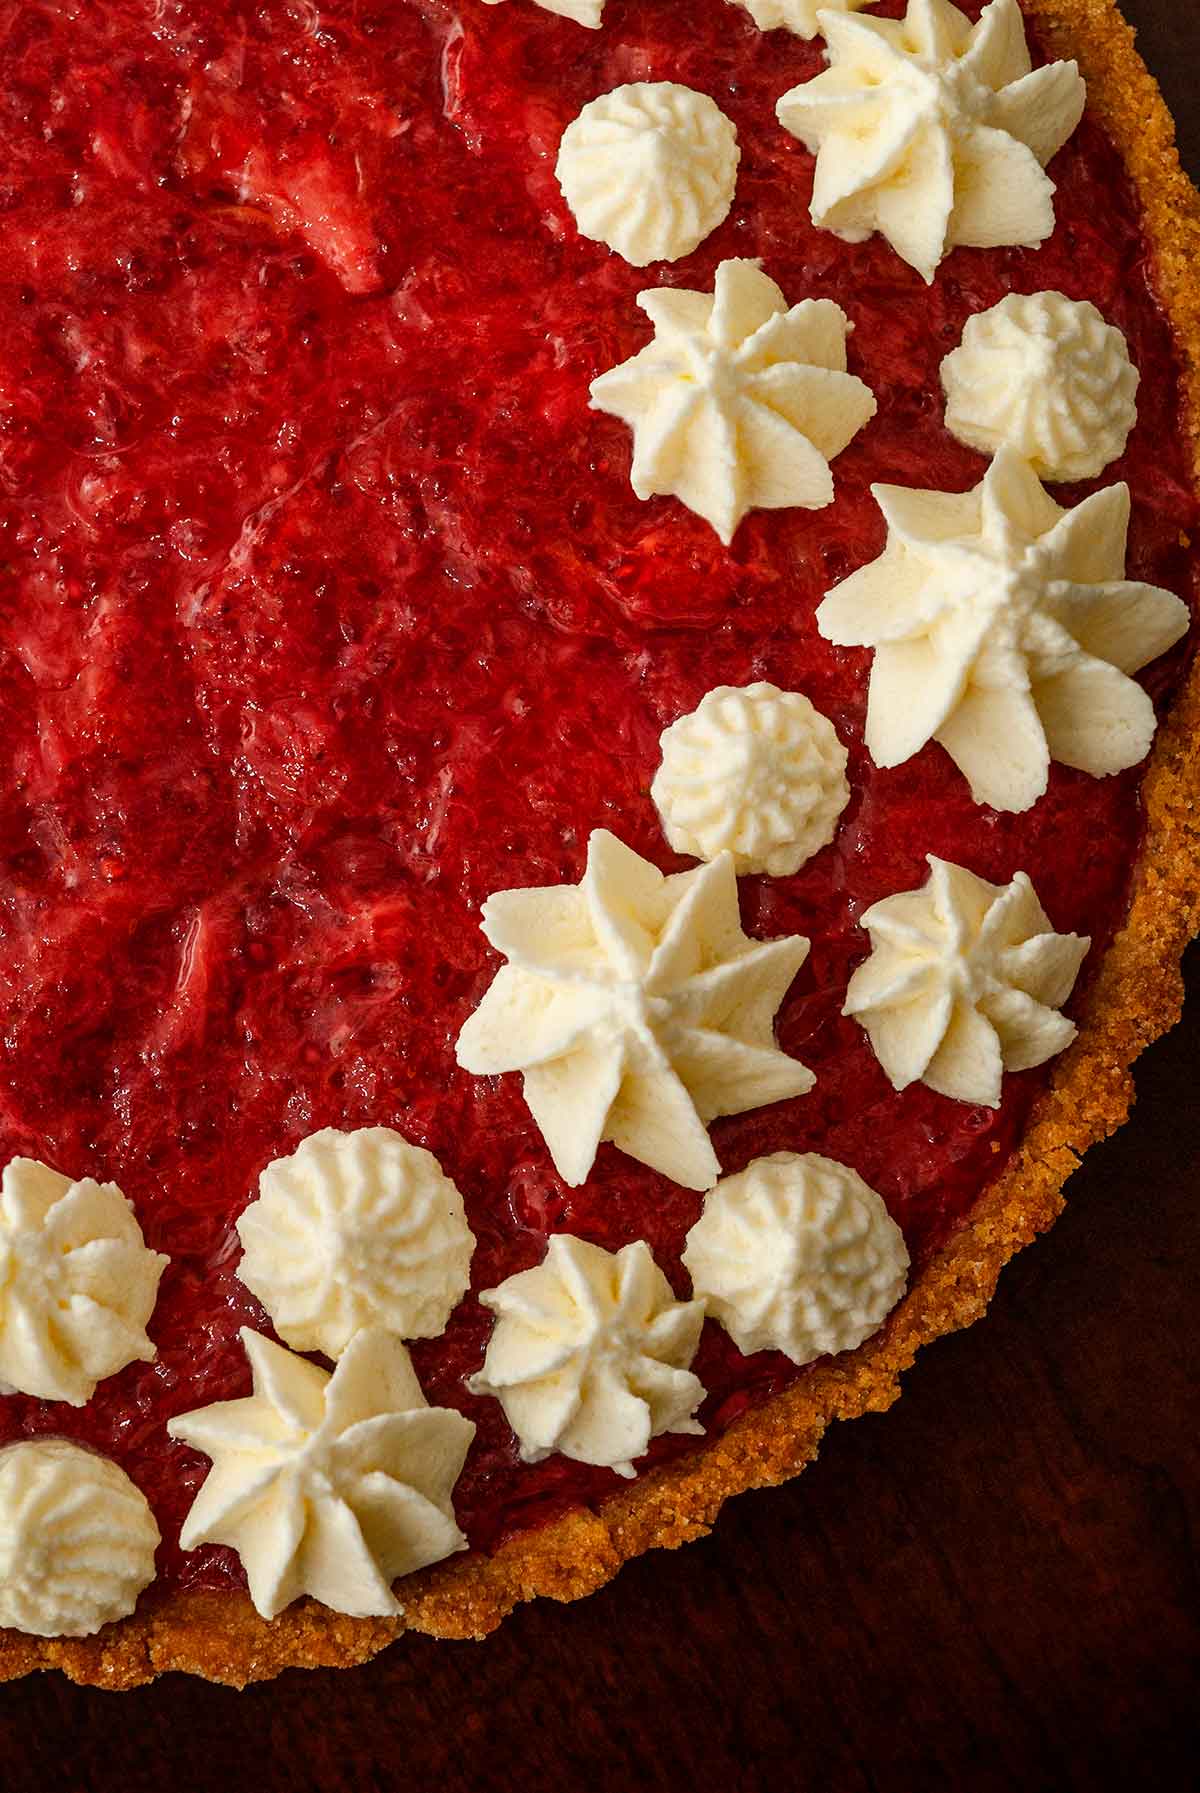 Whipped cream dots and stars on a strawberry rhubarb tart.